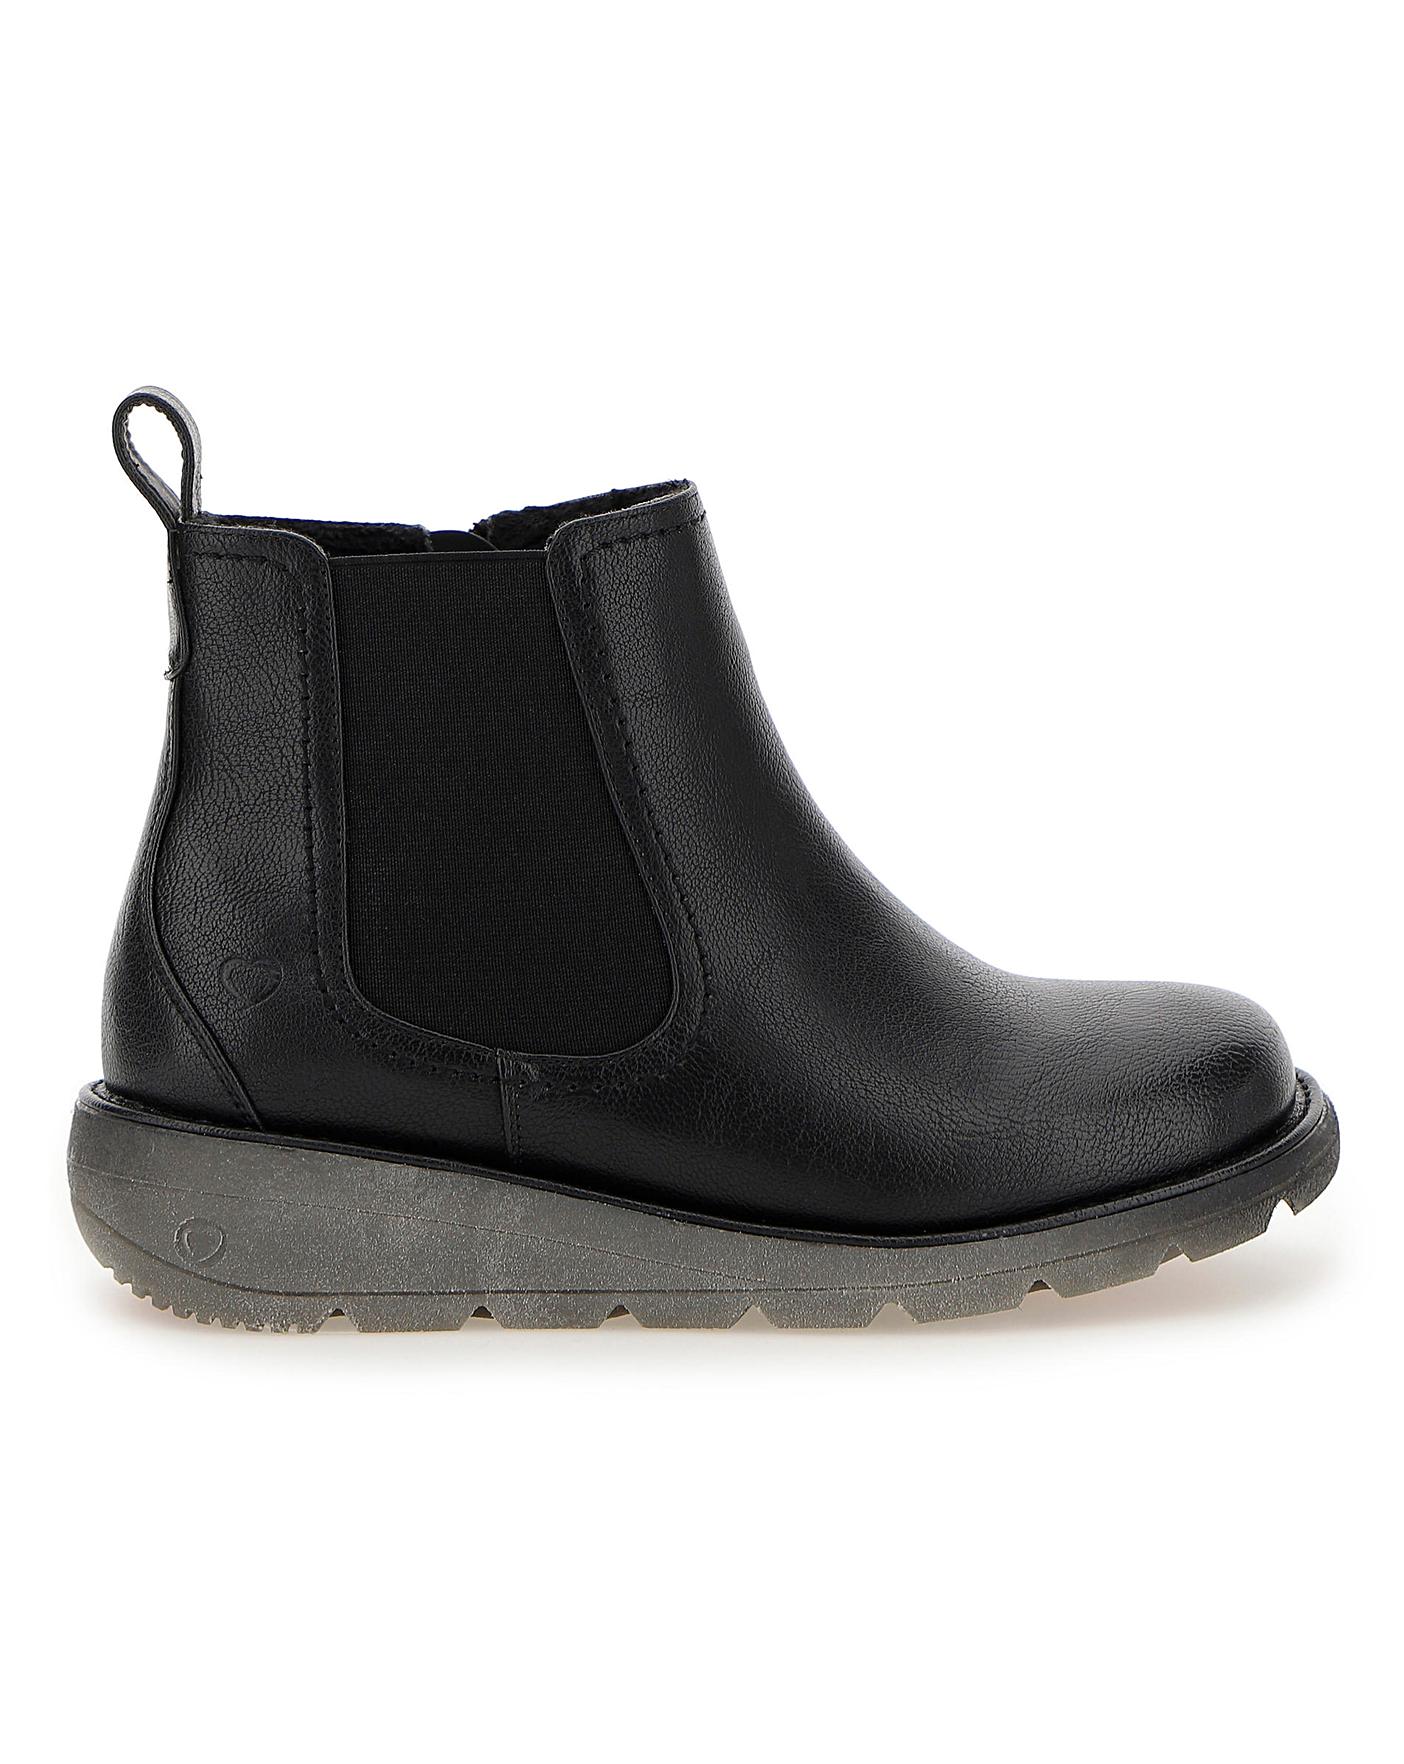 heavenly feet black ankle boots